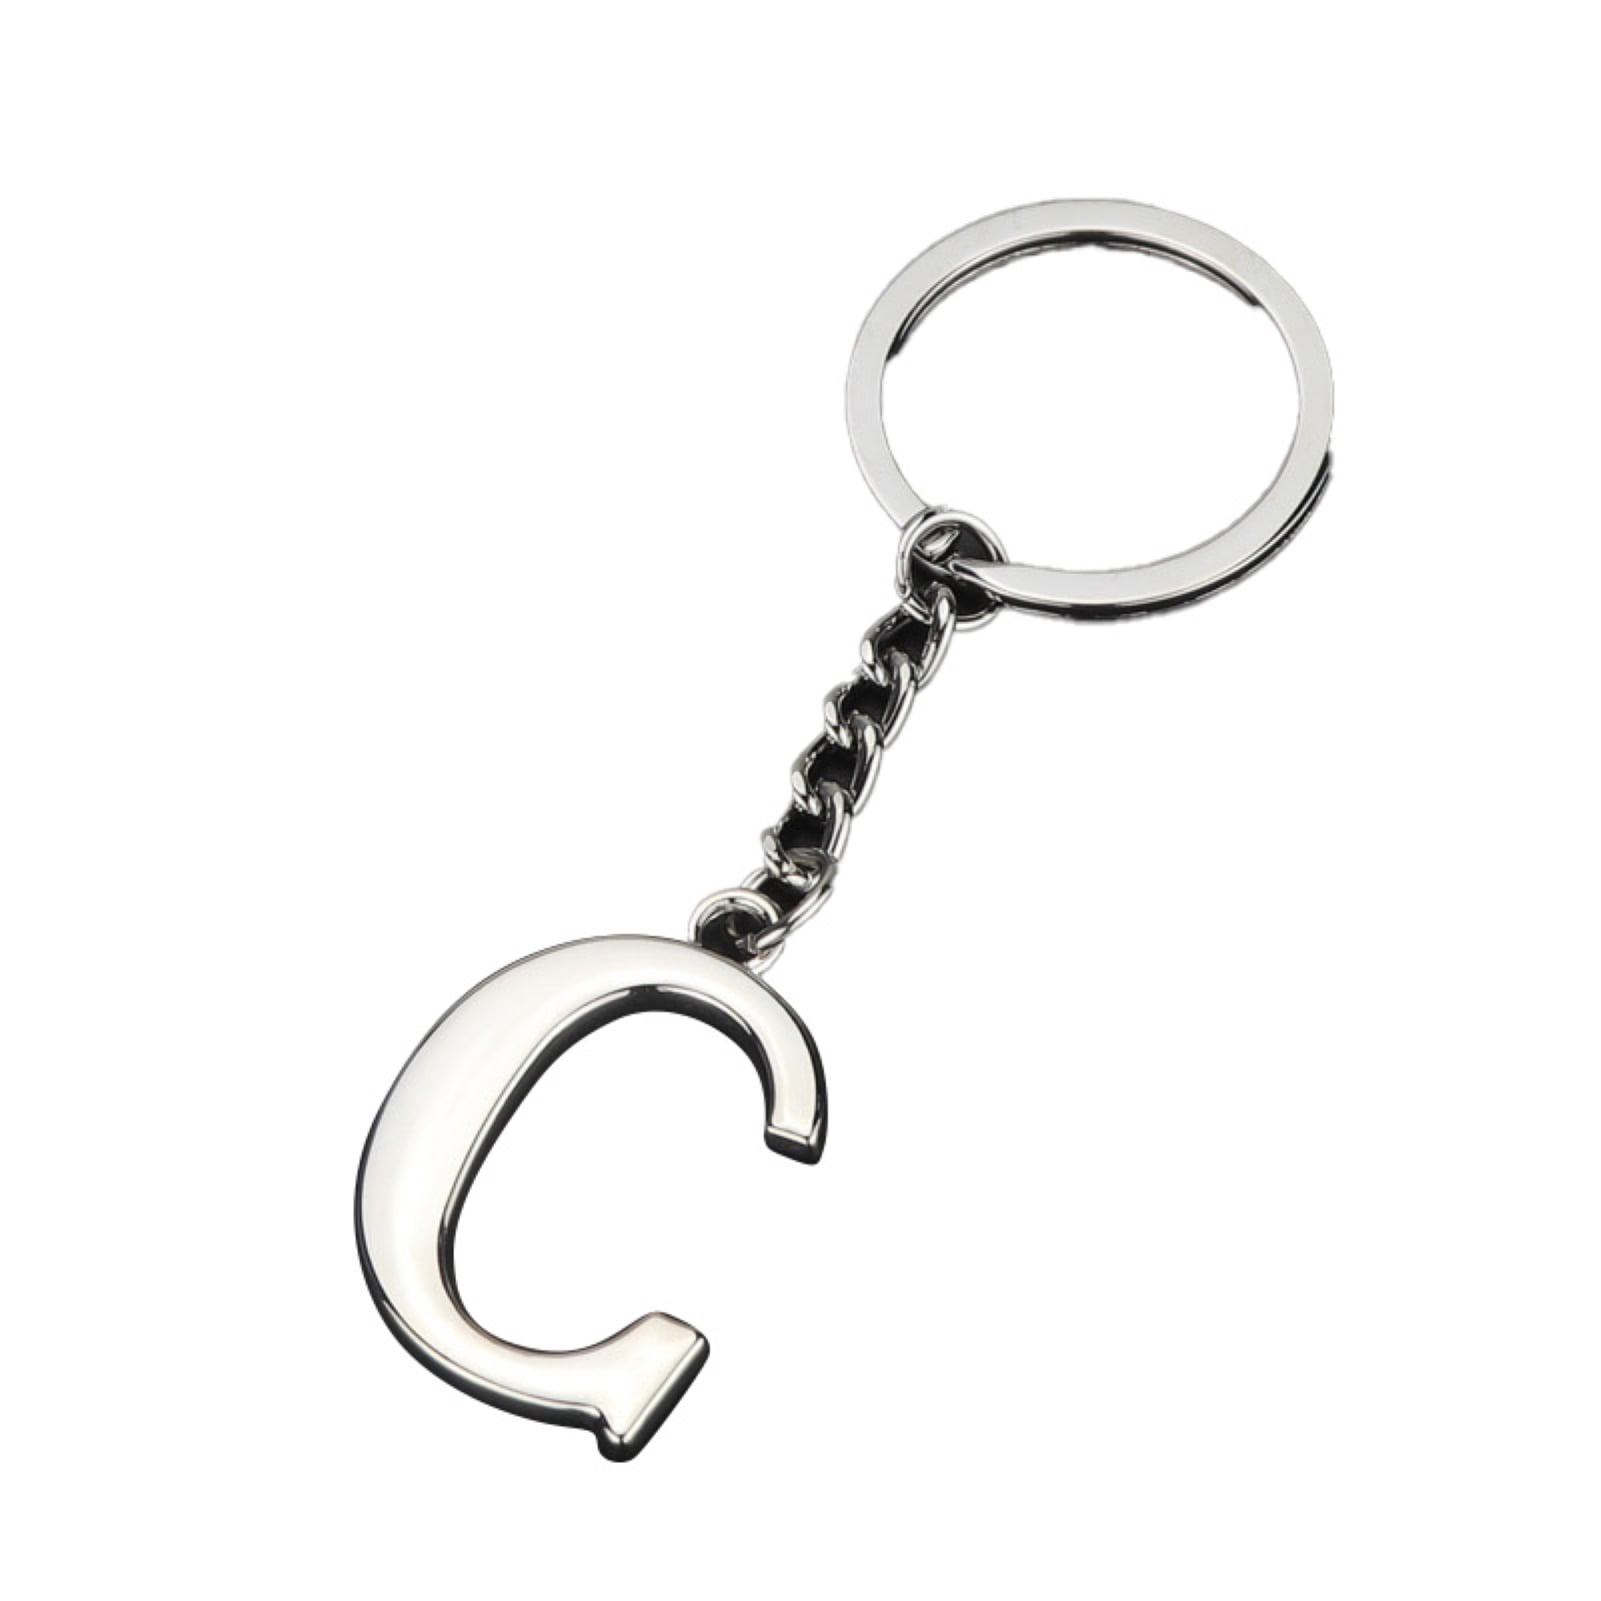 Citystores Key Ring Non-fading Decorative Electroplated A-Z 26 Letter Metal Key Chain Charm for Promotional Gifts,B, Women's, Size: One size, Grey